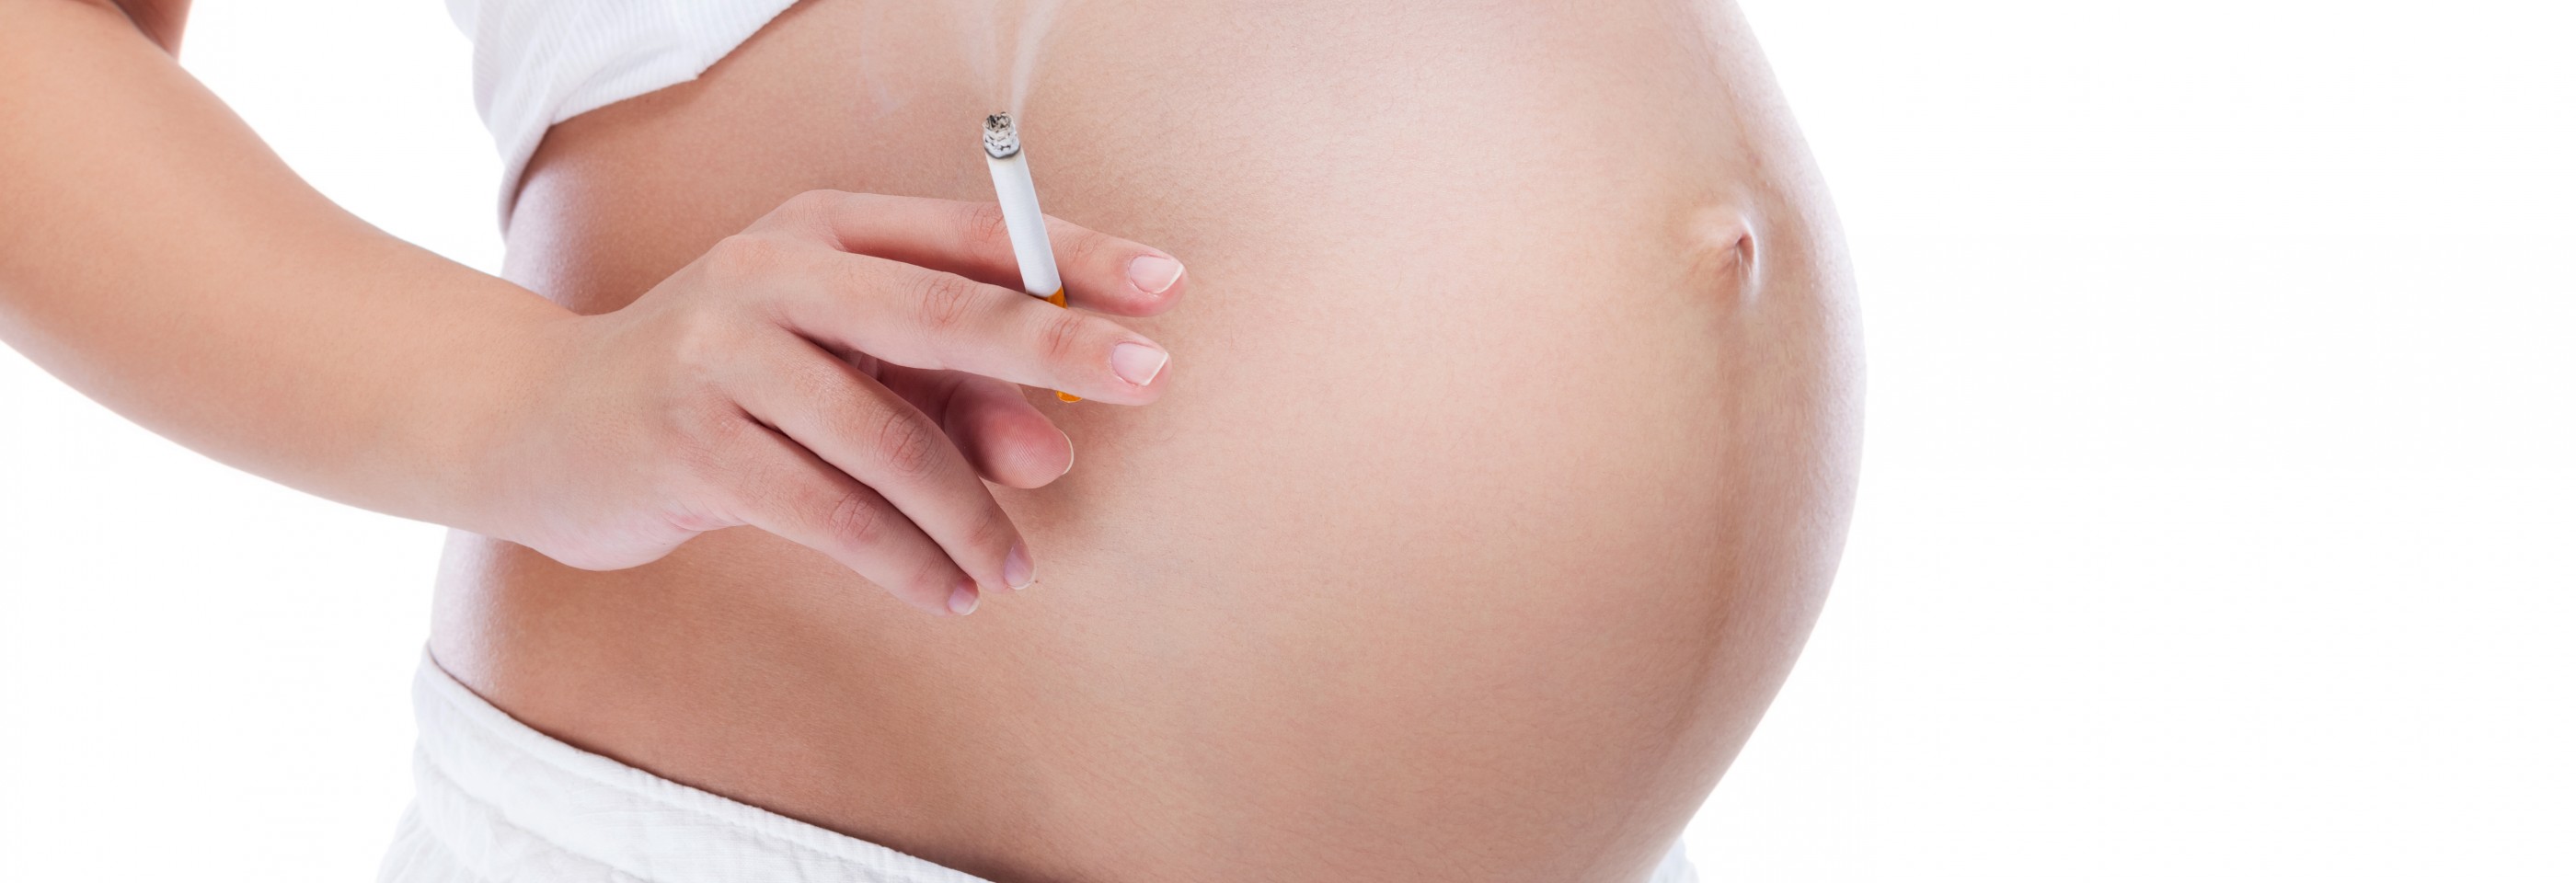 Cadeau in de tussentijd Eekhoorn Infant Bronchiolitis Likely Linked to Mom's Smoking While Pregnant - Lung  Disease News